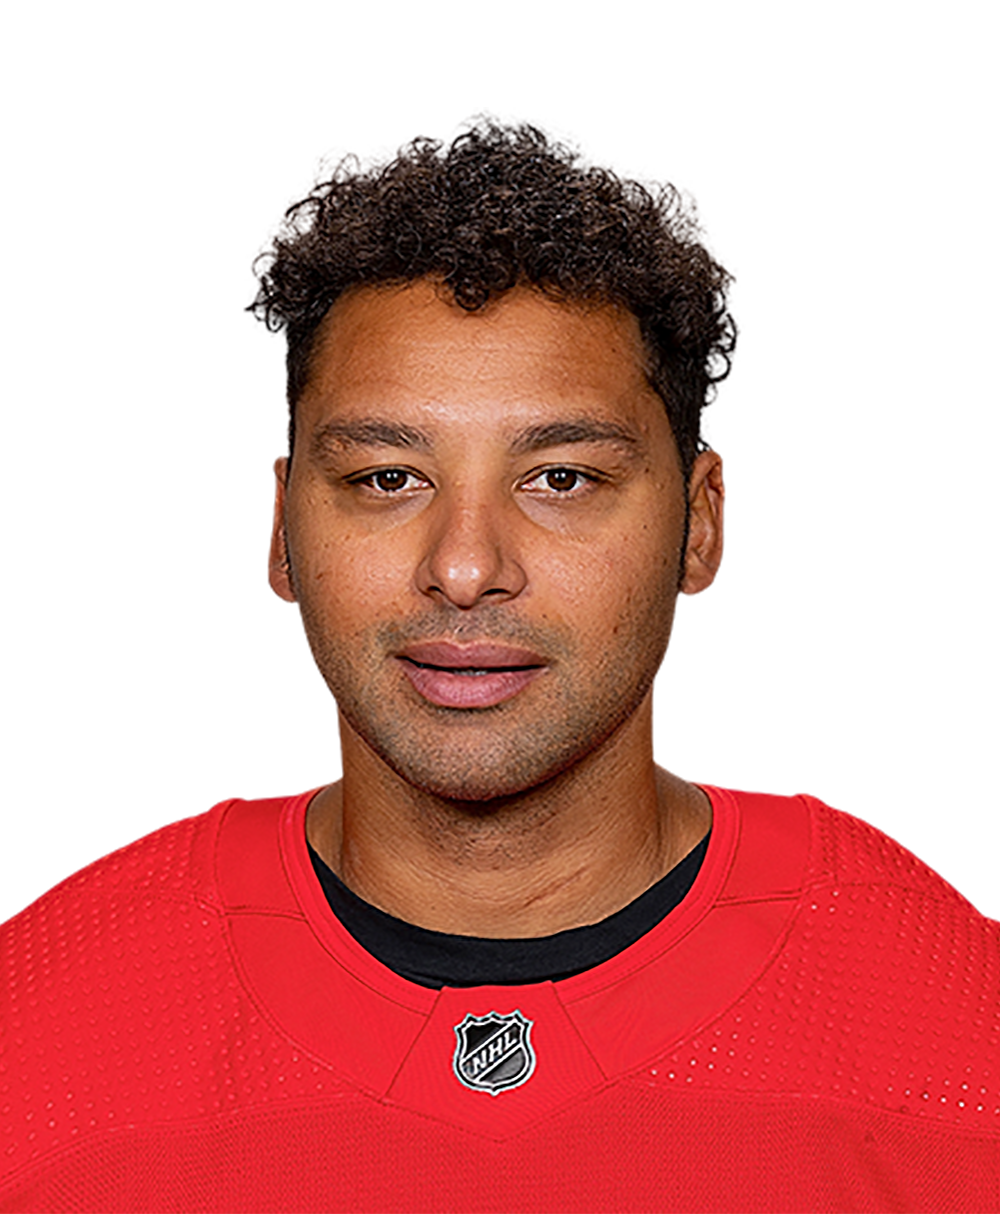 Red Wings' Trevor Daley among hockey diversity alliance fighting